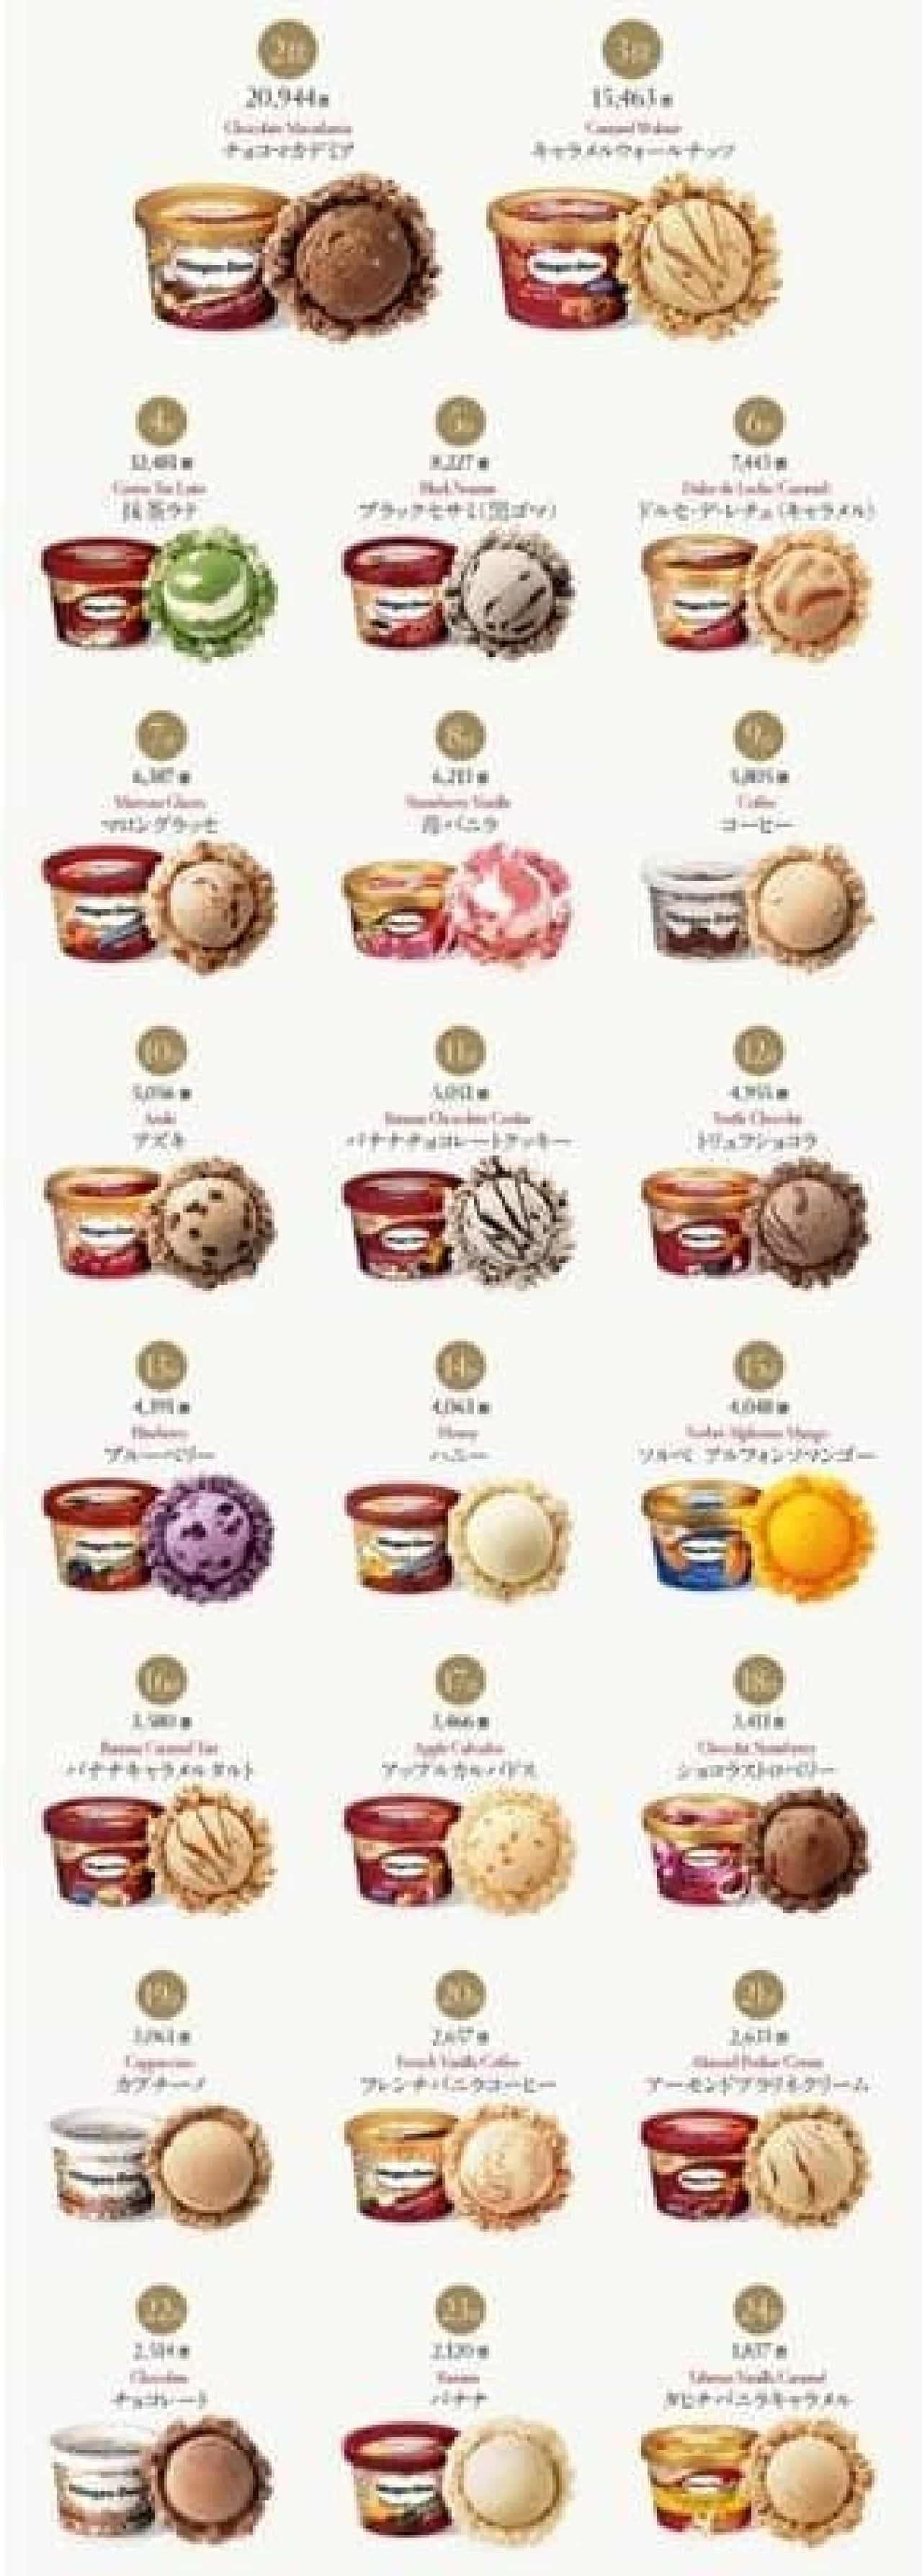 What is your "memorable" flavor?